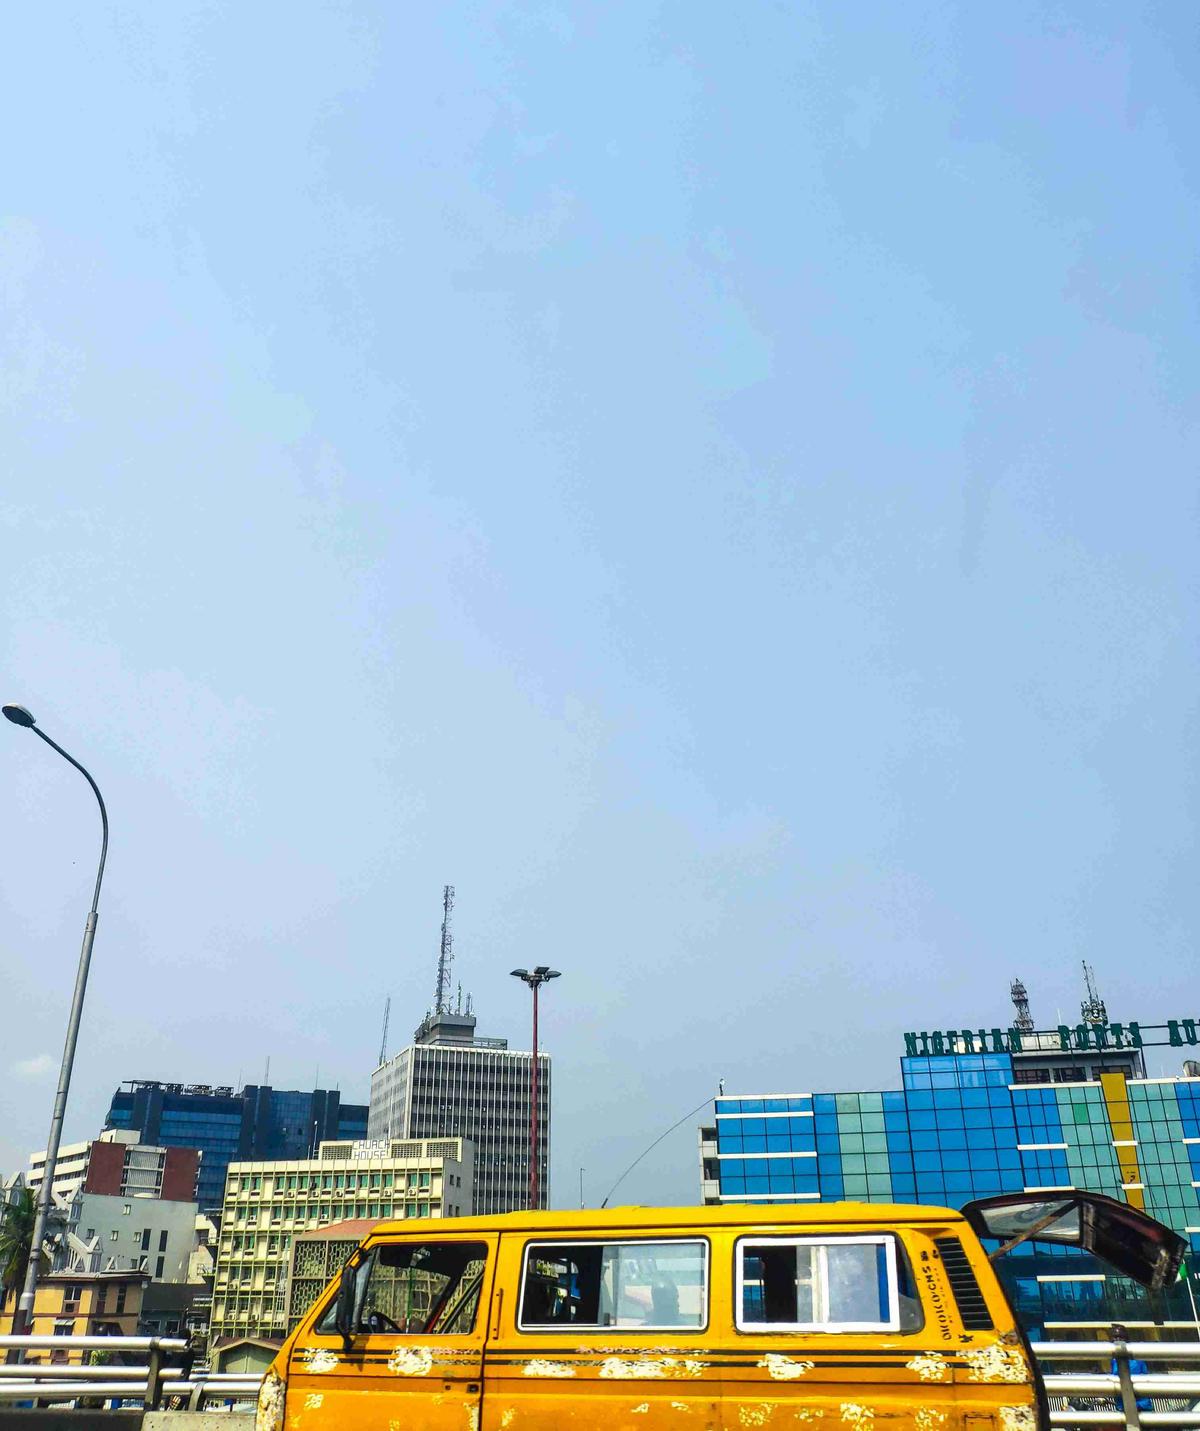 Yellow Bus in Urban Cityscape with Modern Buildings Against Clear Sky